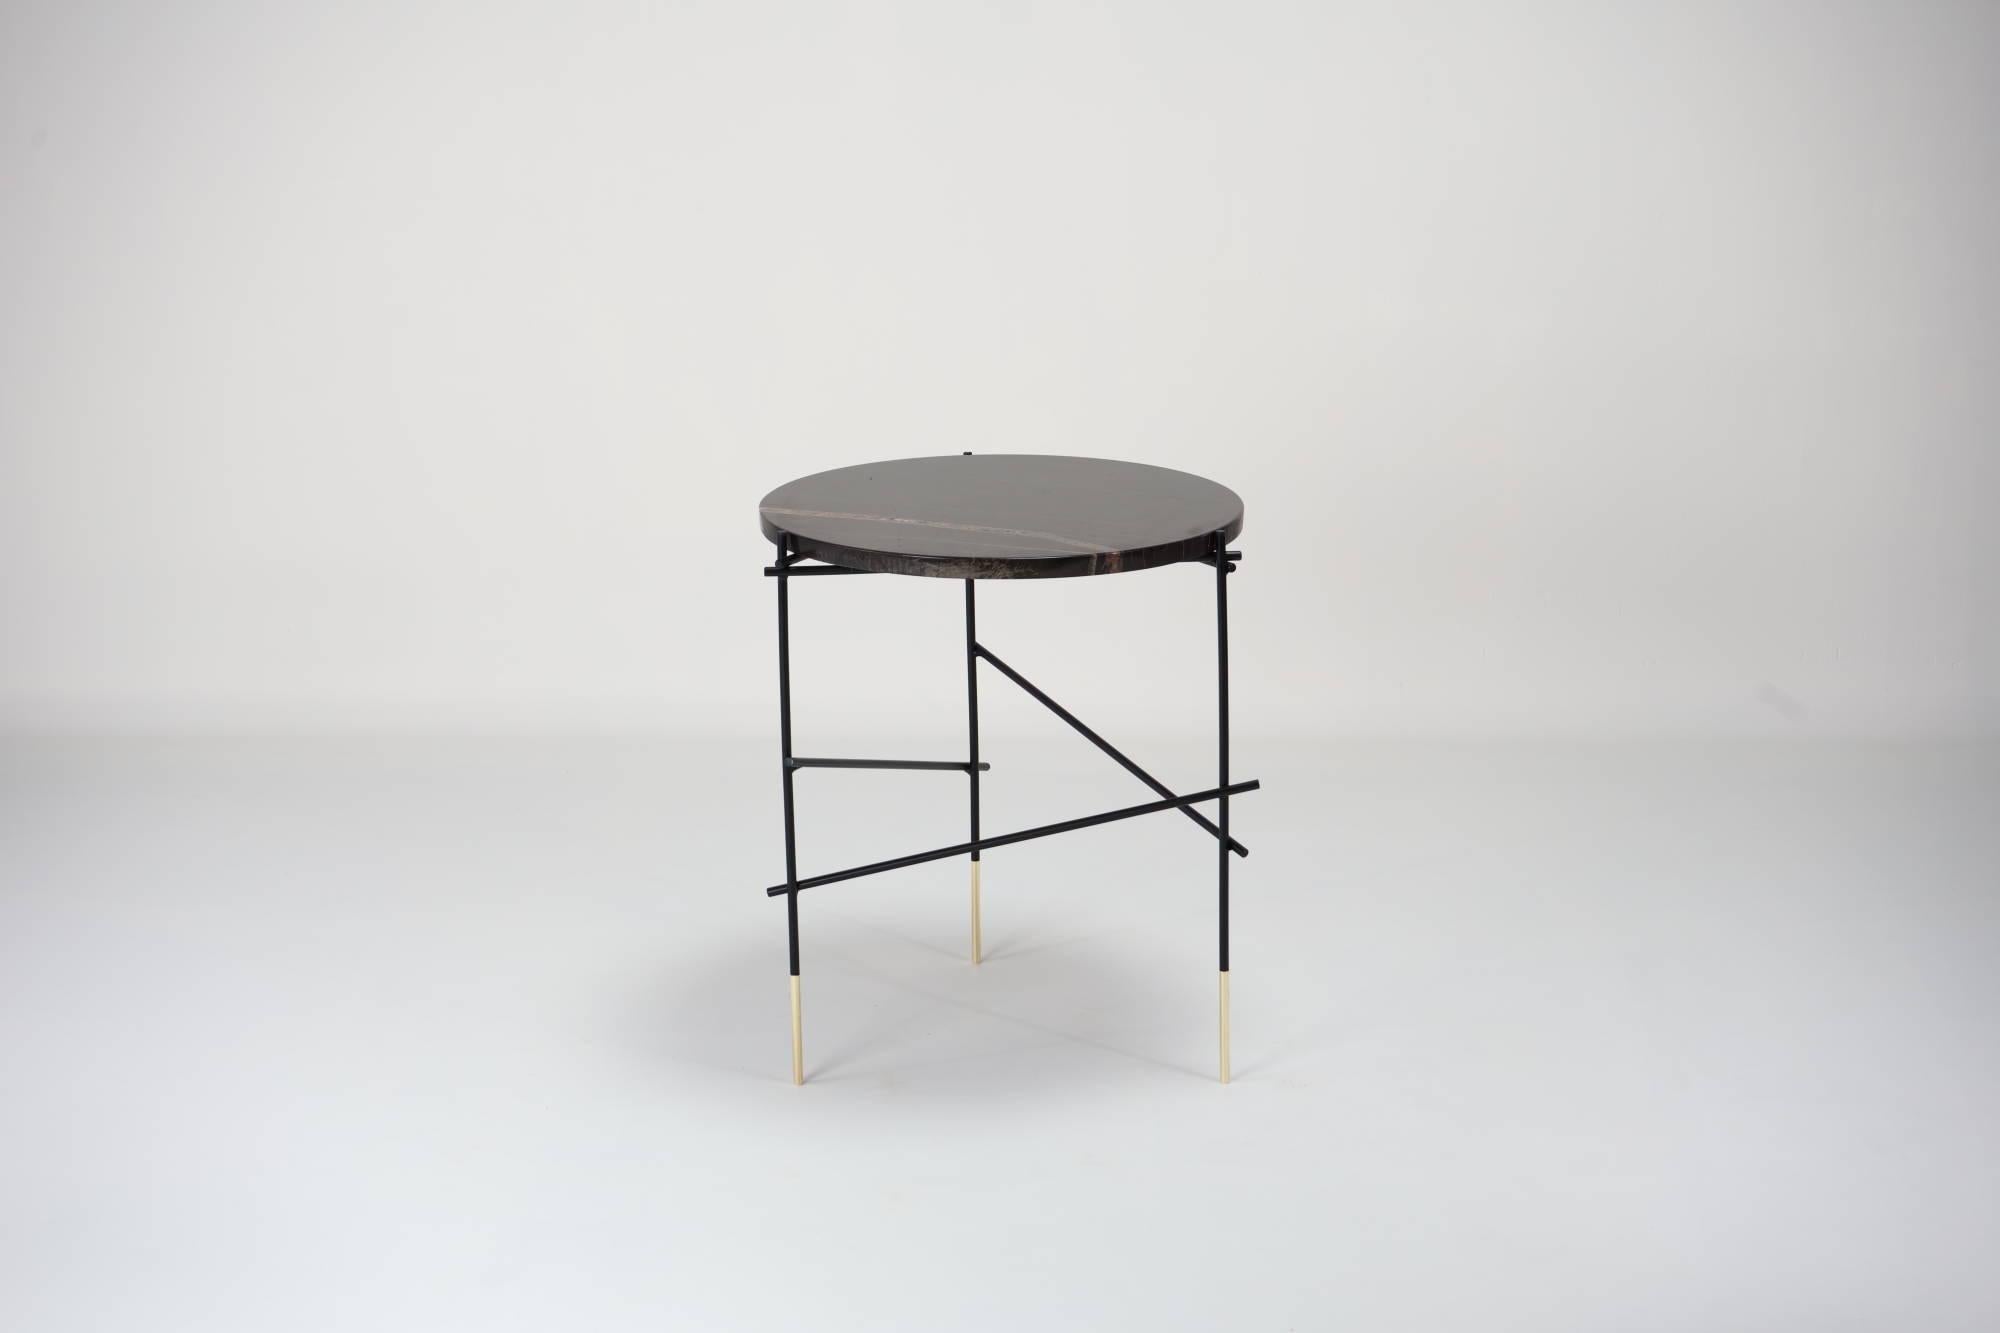 Stilts side table was inspired by the shape of the traditional fishing stilts. Fishermen found on stilts are those who do not have access to sophisticated equipment for fishing. The practice started during World War II when food shortages and